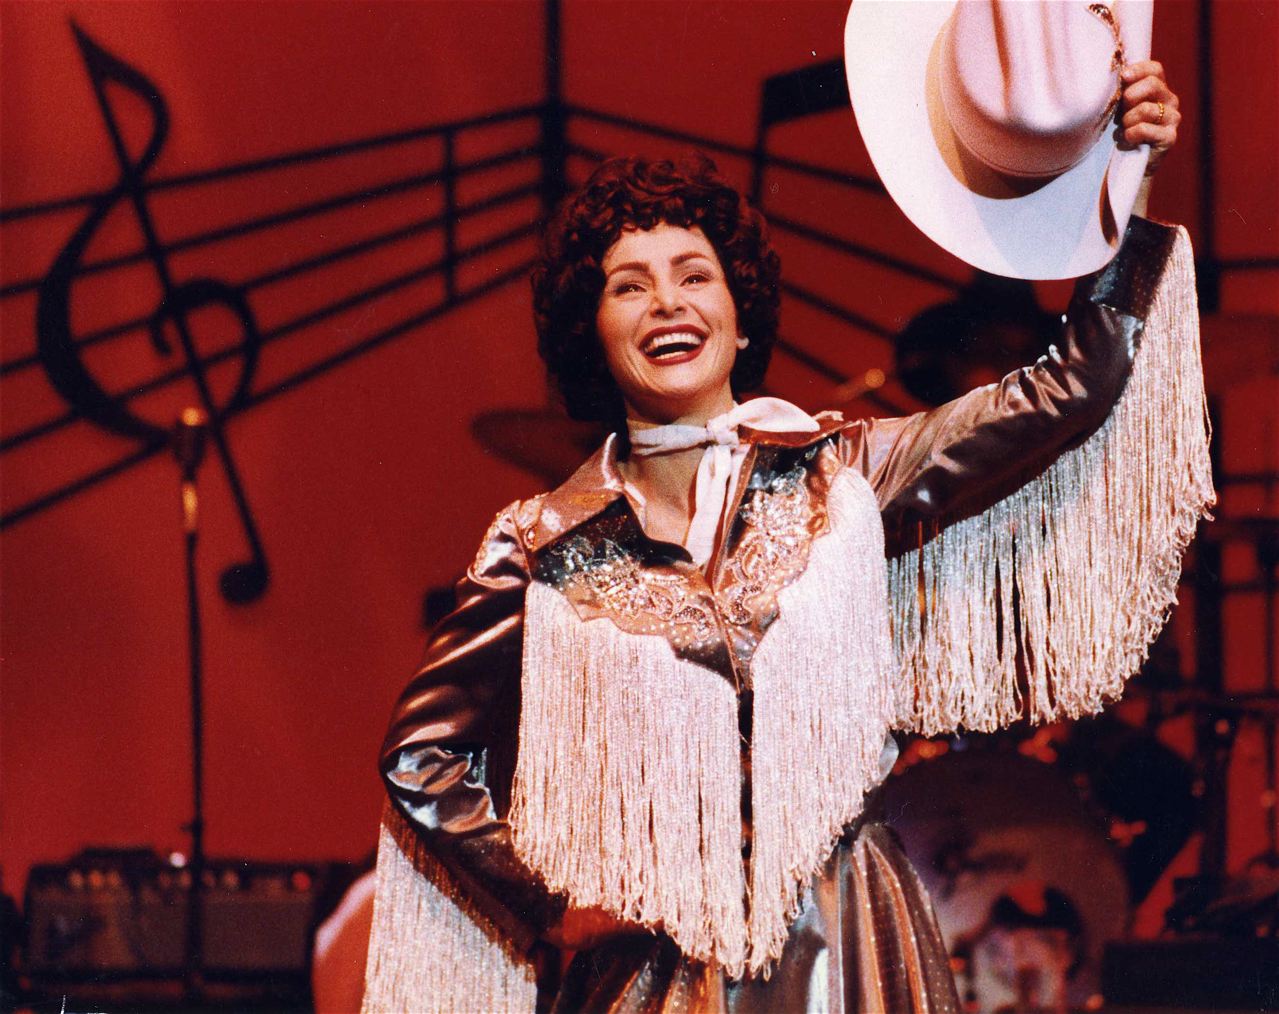 Stevie Vallance as 'Patsy' in stage production Just A Closer Walk with Patsy Cline (90s).